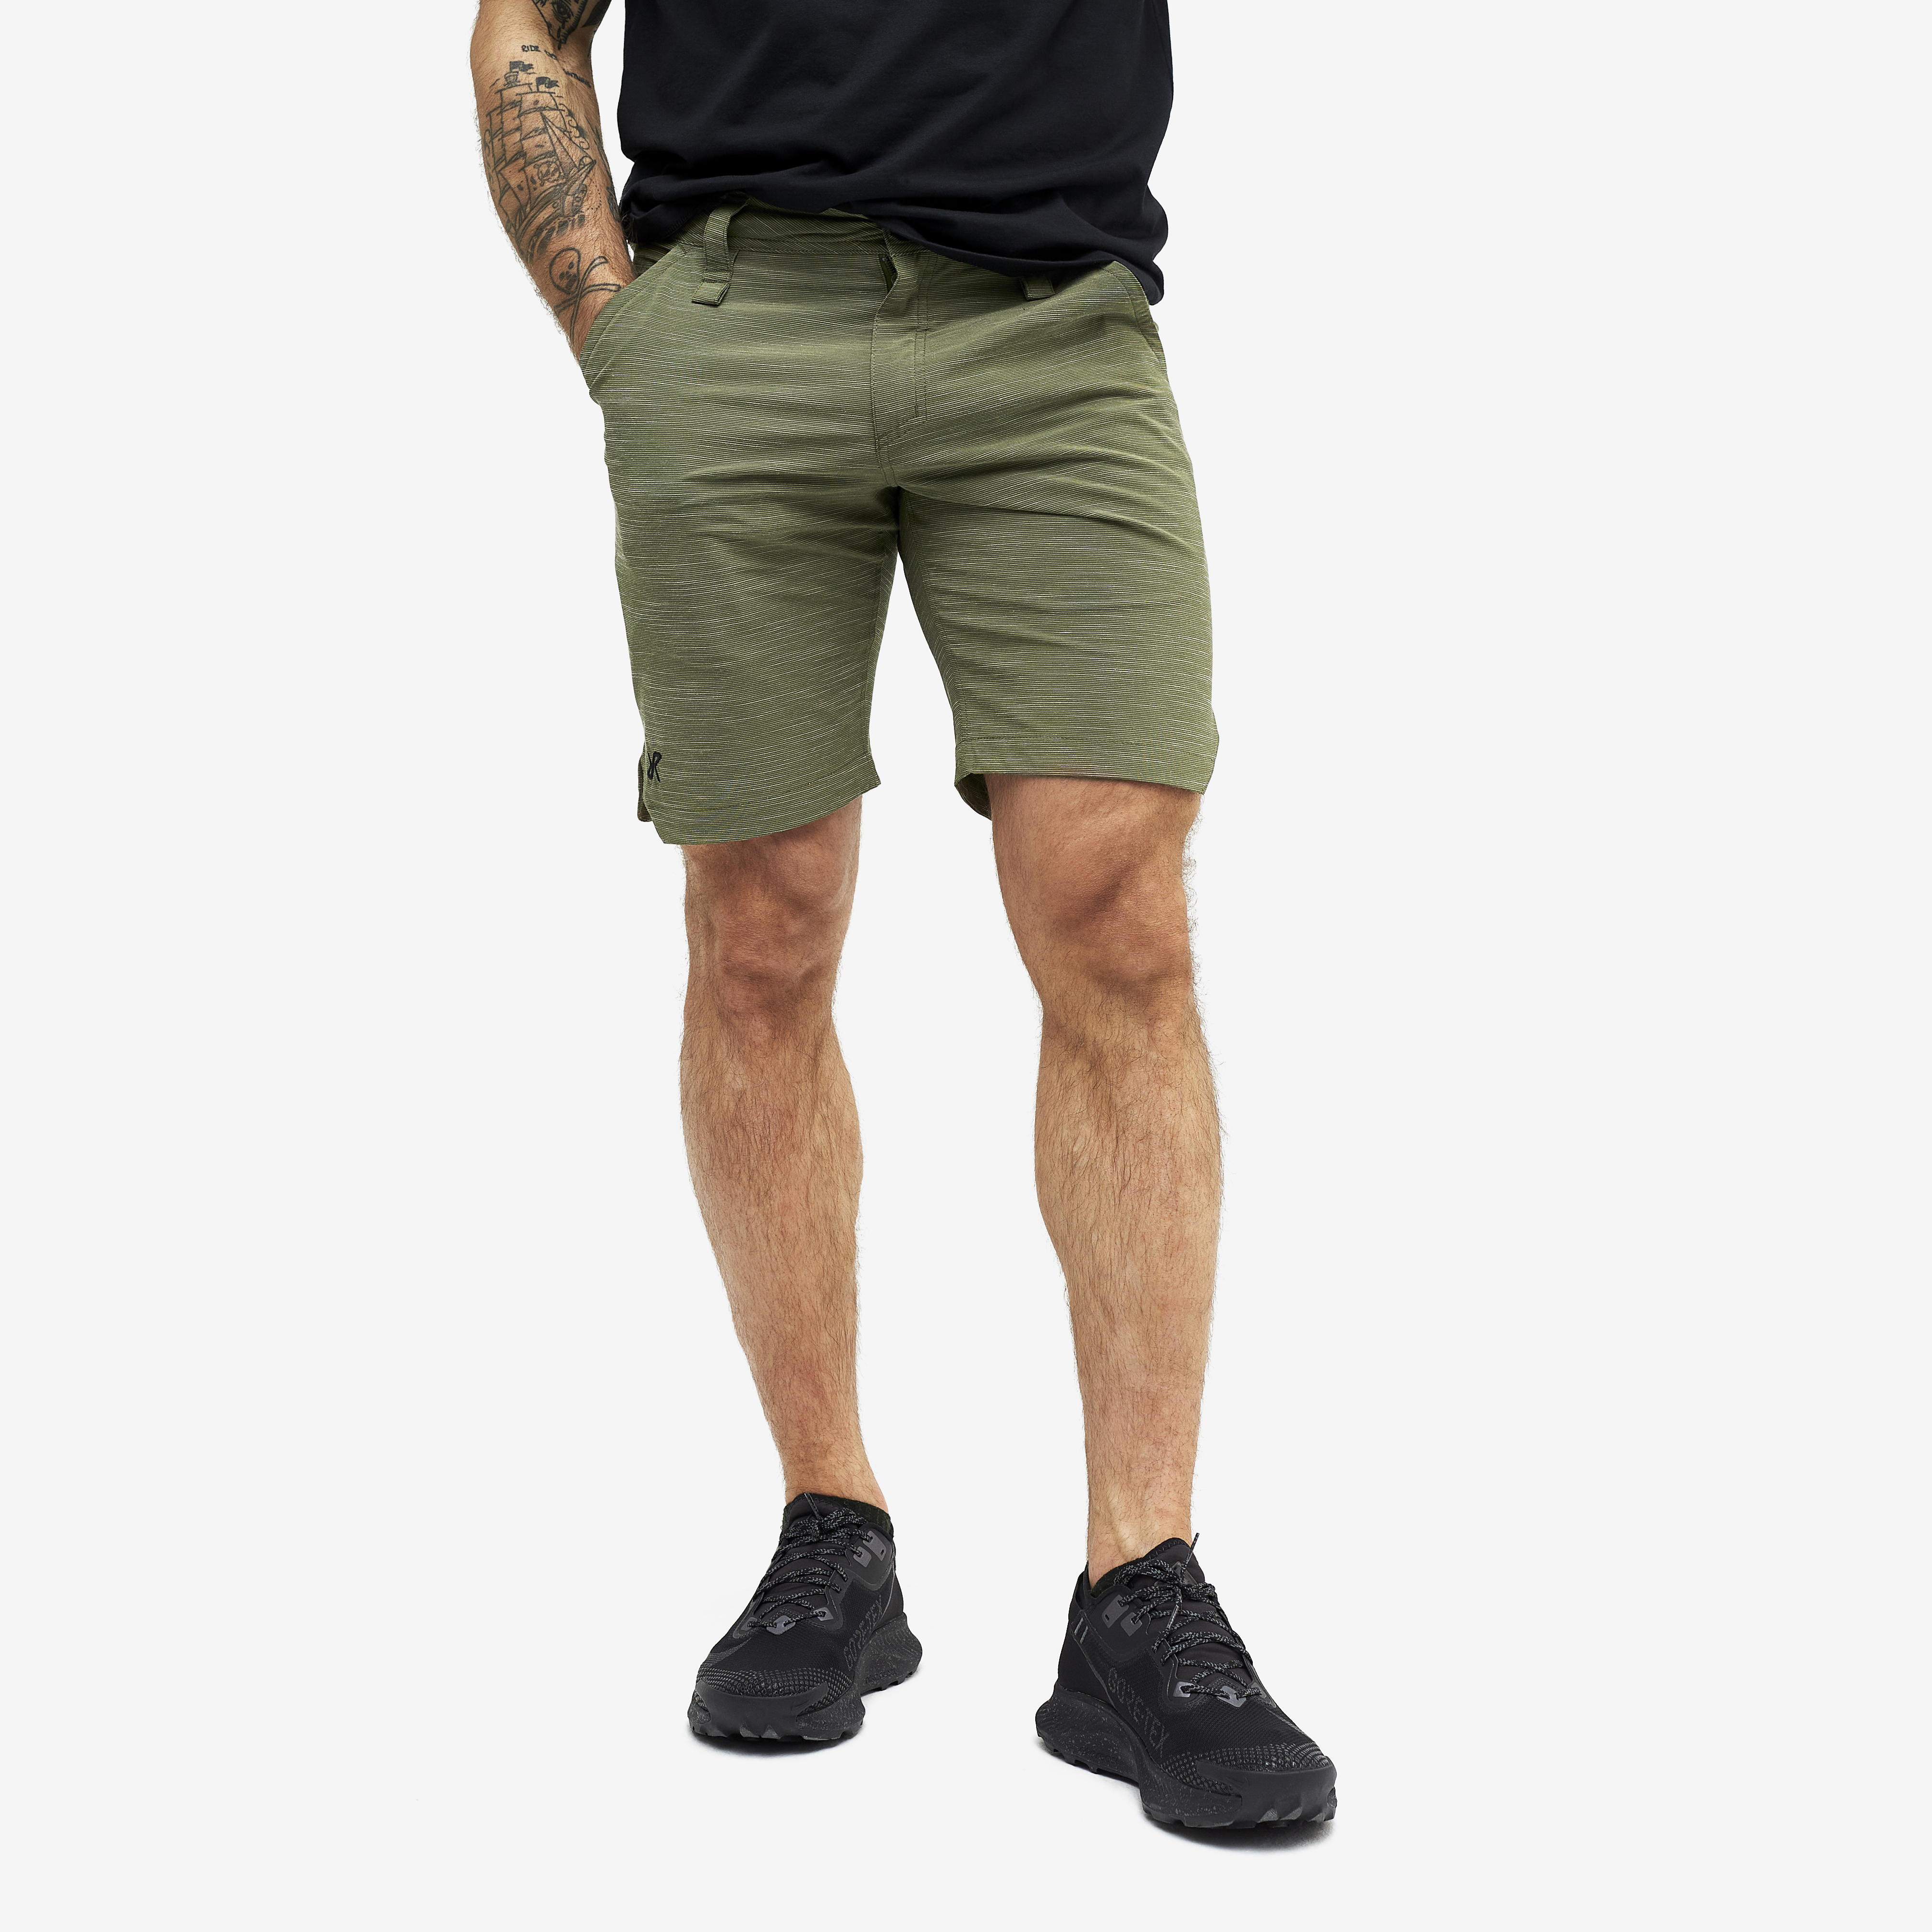 Hike & Dive Shorts Olive Night Hombres